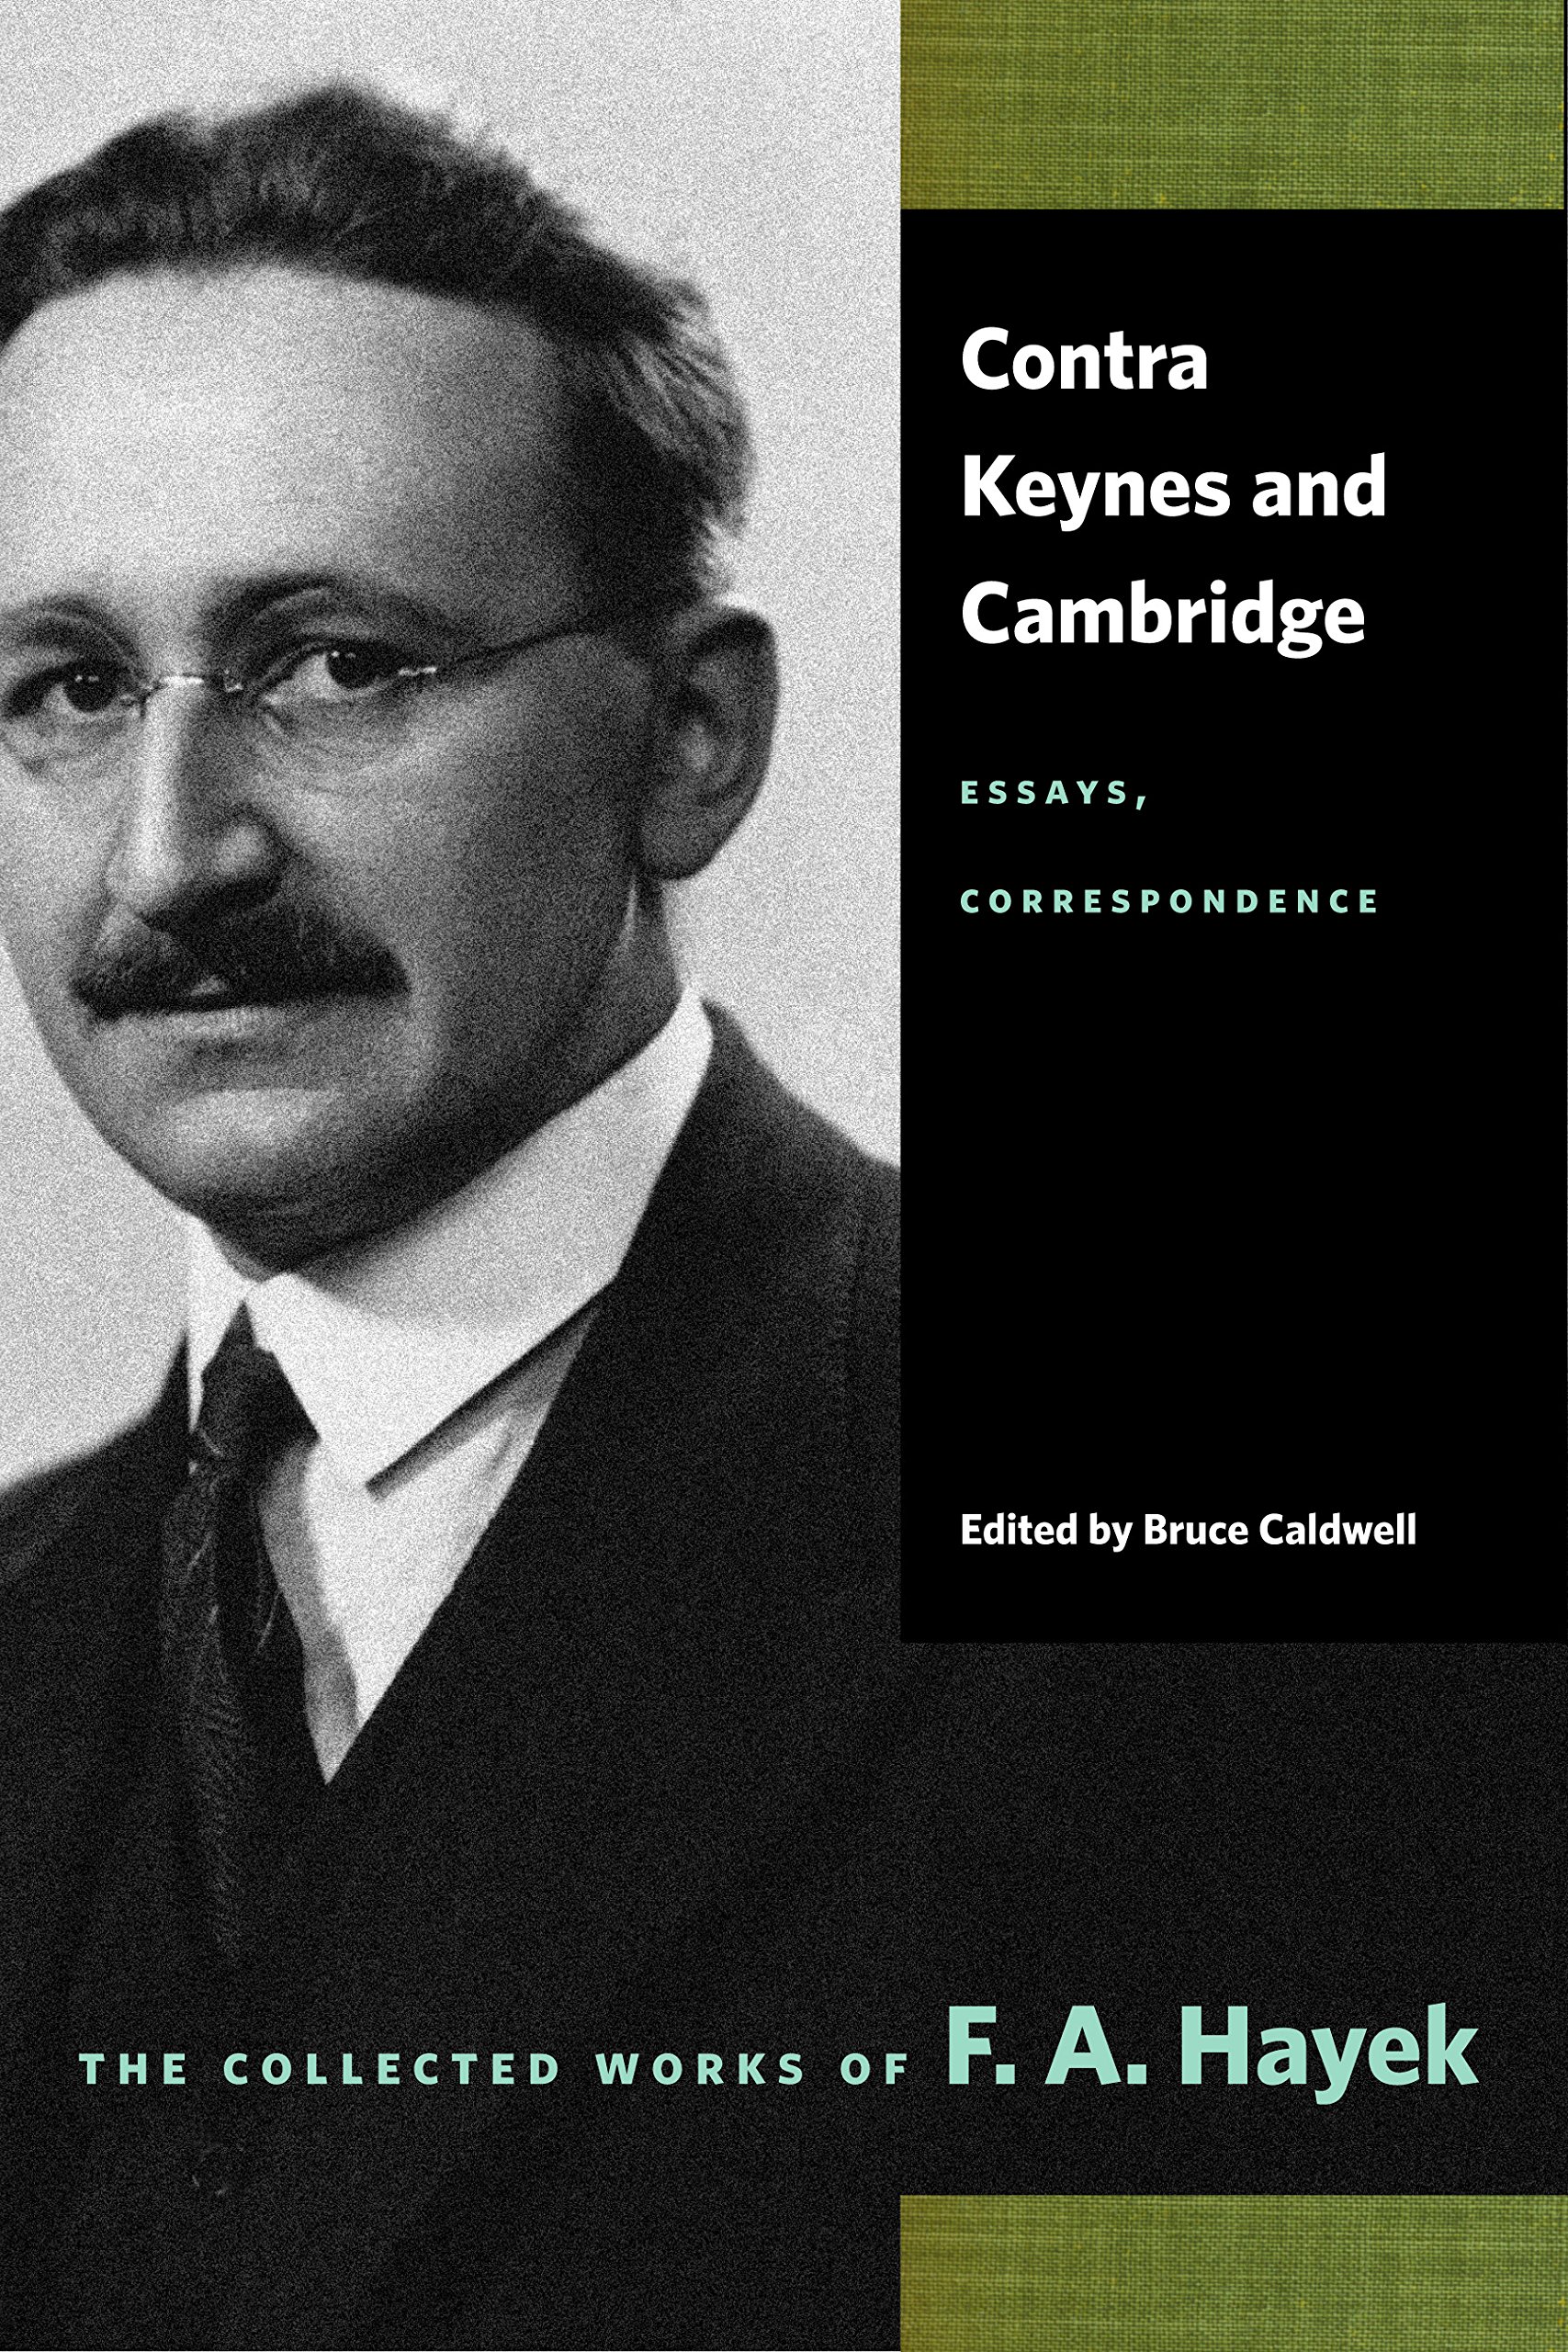 Contra Keynes and Cambridge: Essays, Correspondence (The Collected Works of F. A. Hayek)